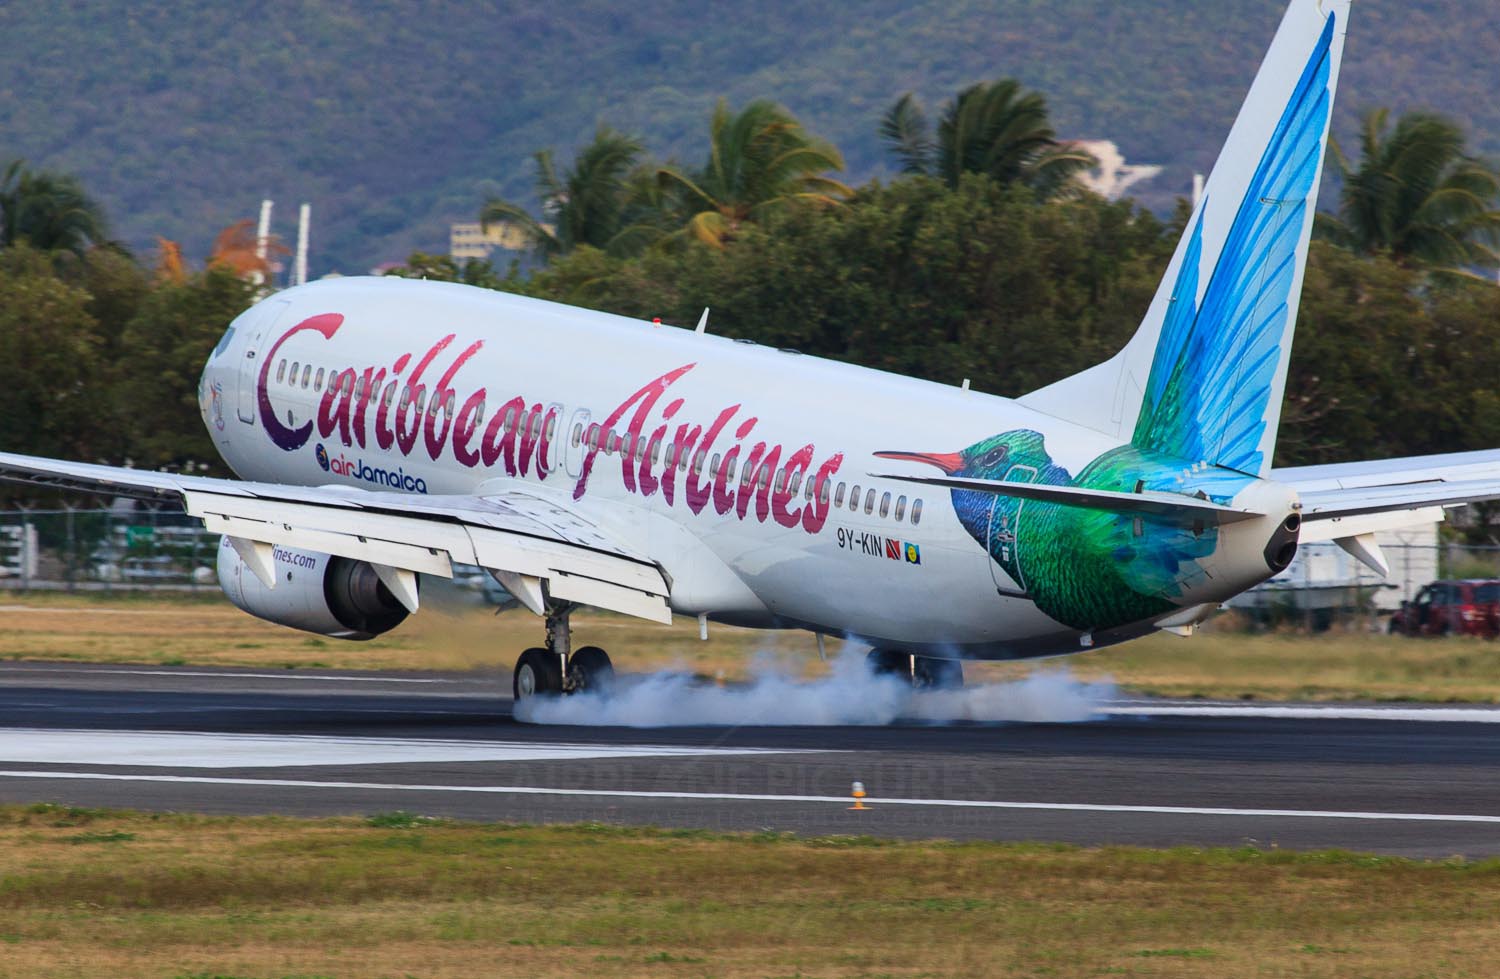 From April 2nd 2022 Caribbean Airlines Increases Flights On The Domestic Air Bridge